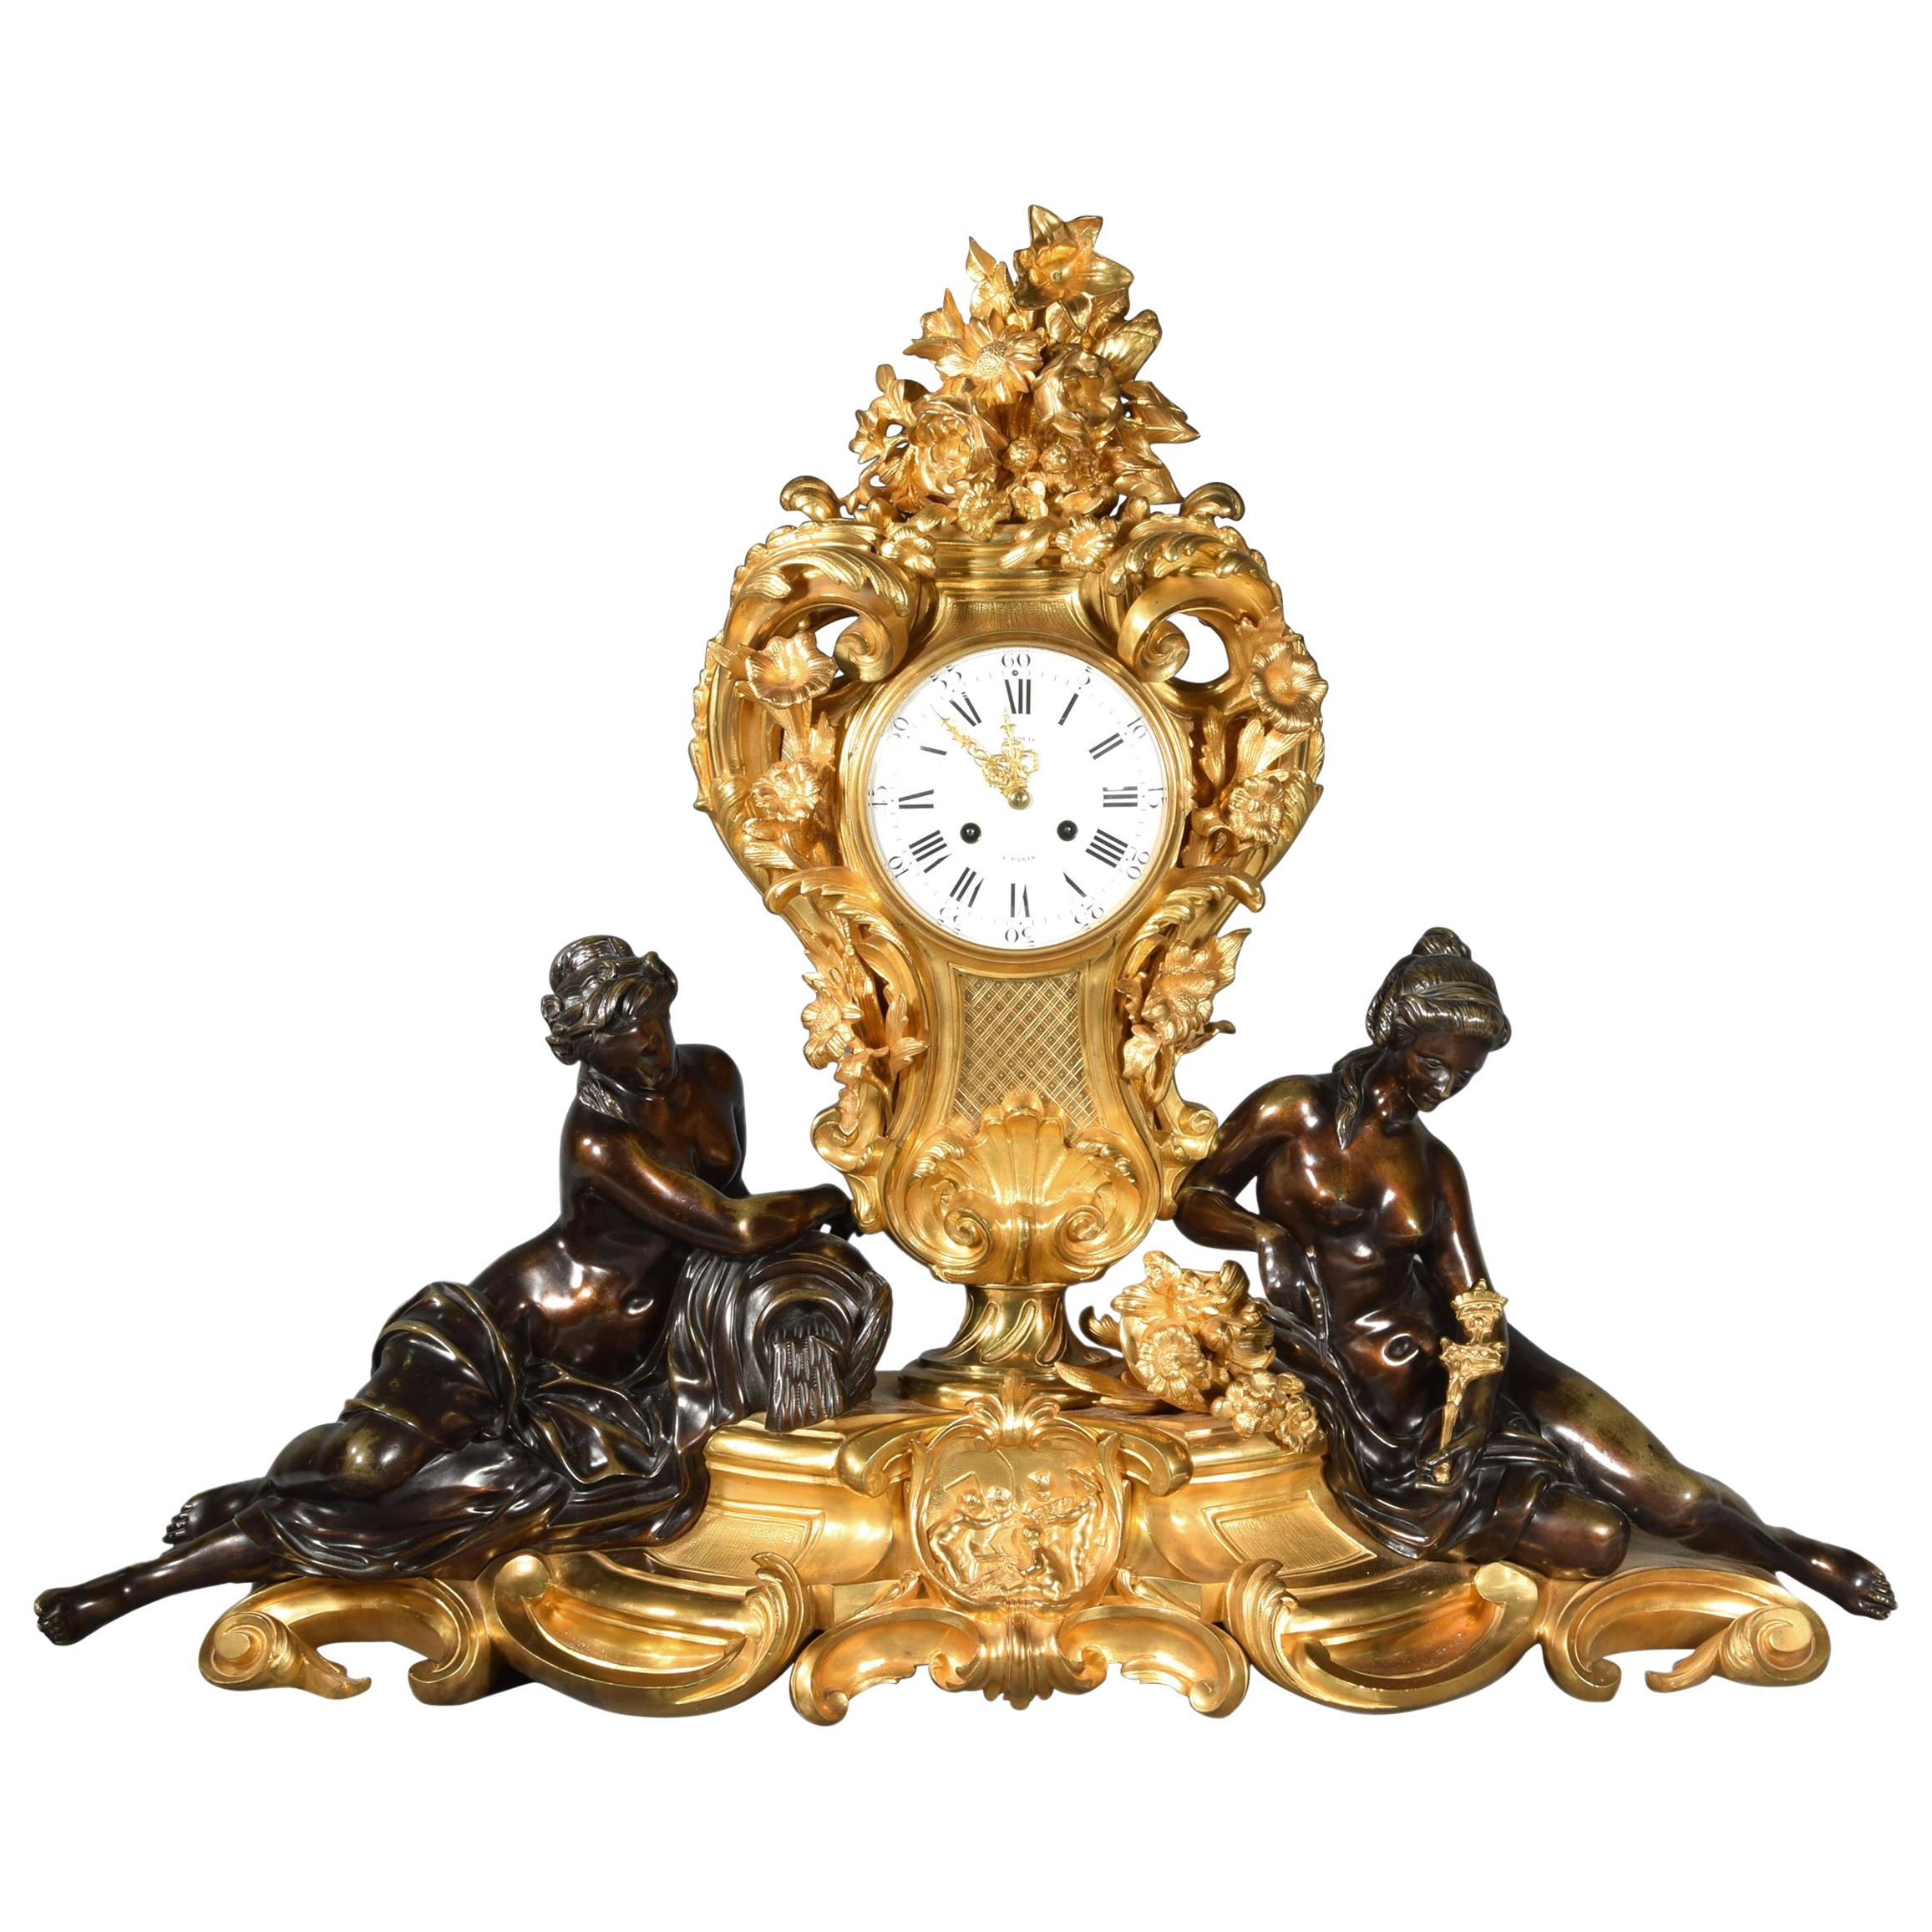 Patinated and Gilt Bronze Mantle Clock, Marquis, Paris, France, 19th Century